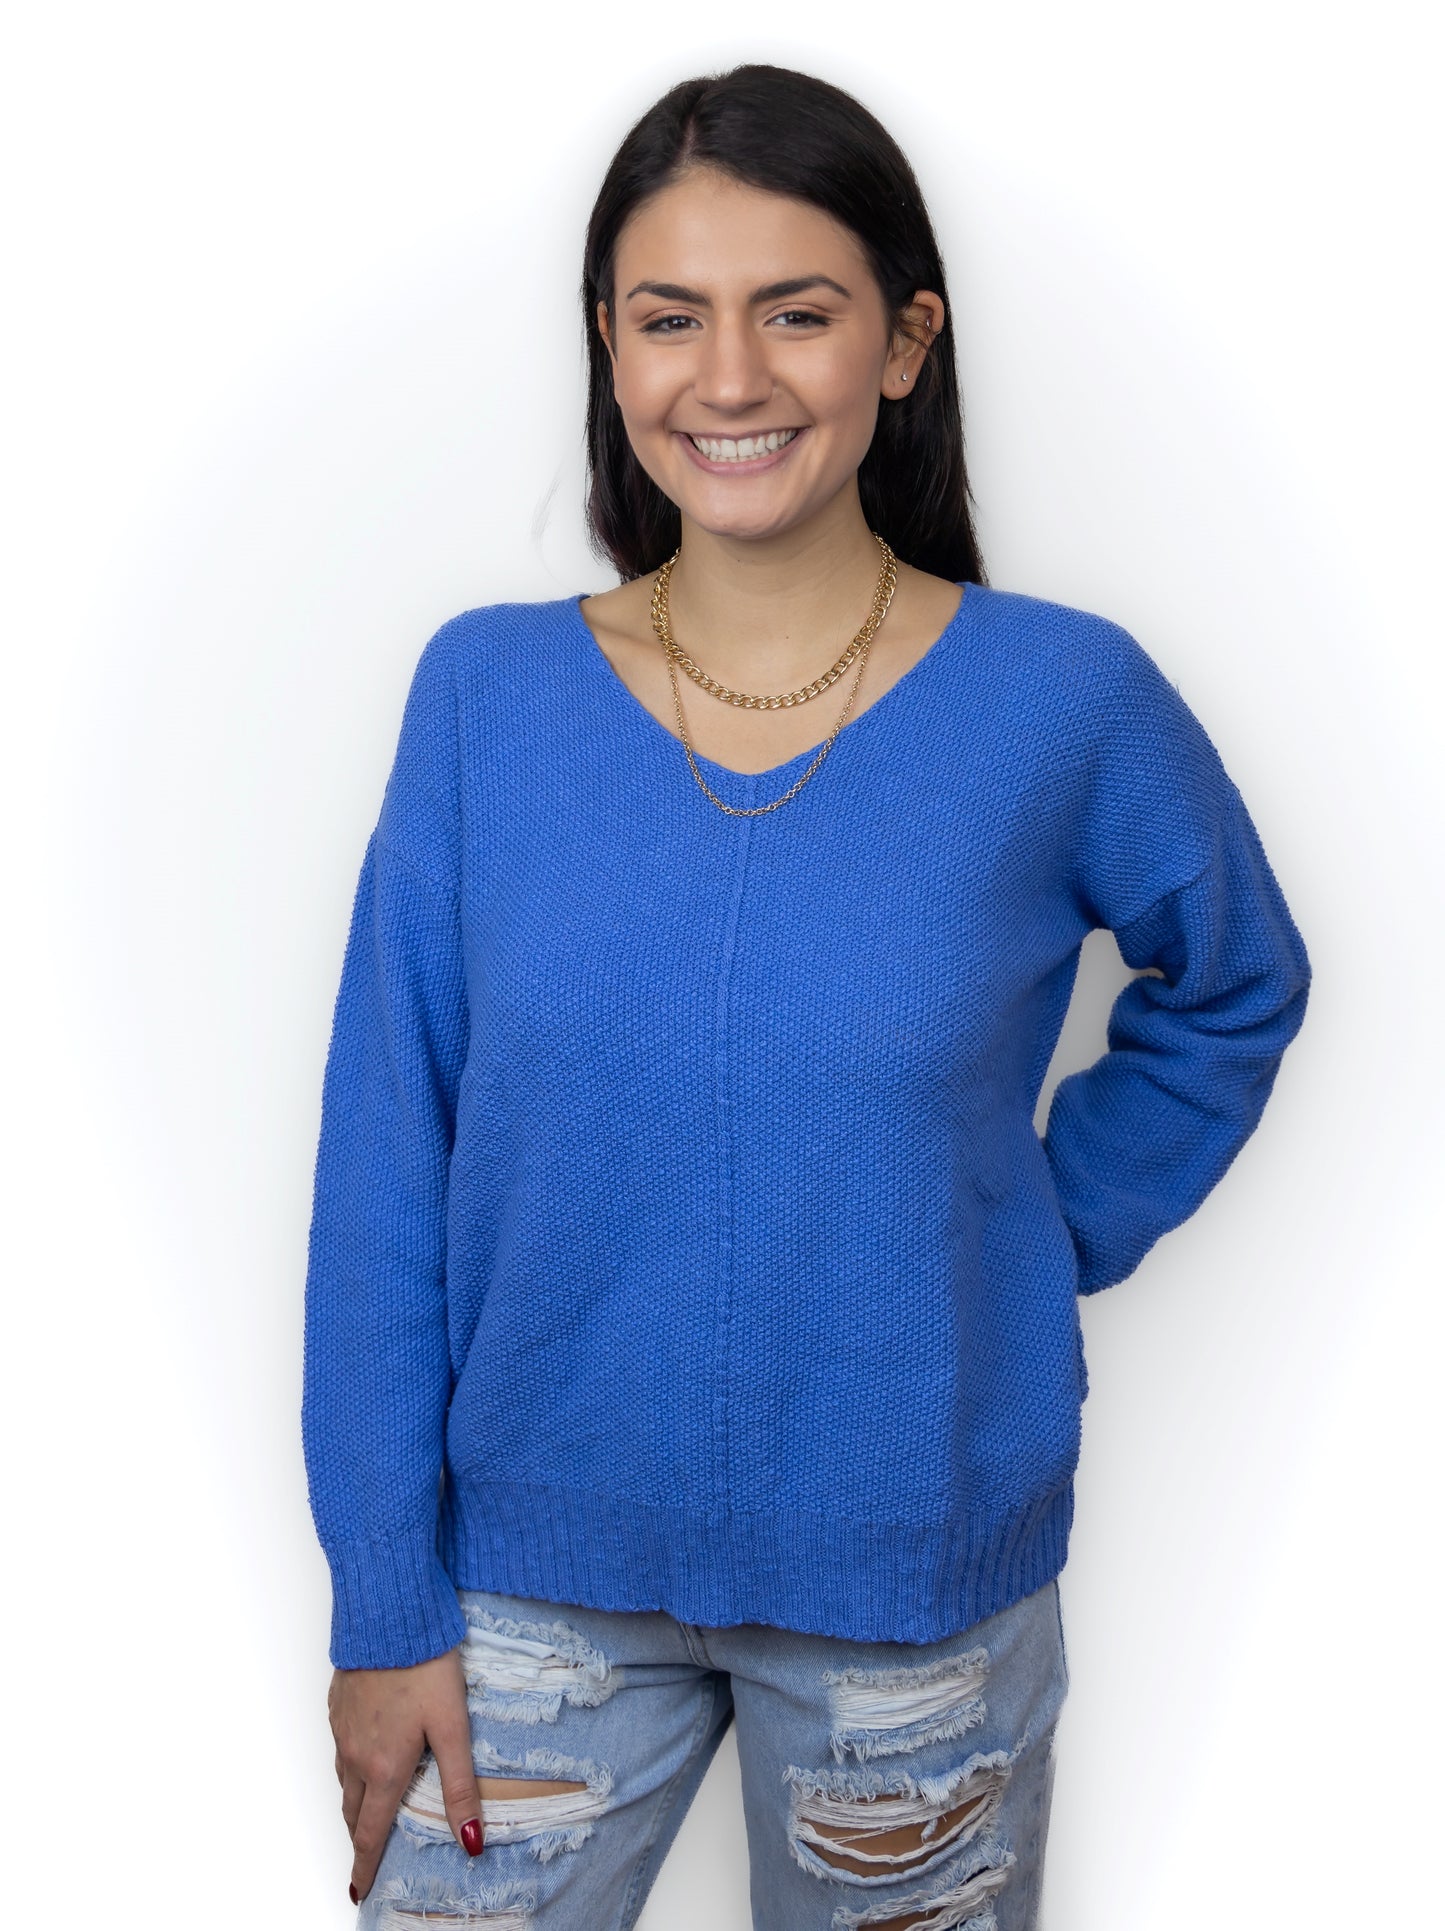 Ocean blue. 100% cotton slub seed stitch sweater by Avalin. Features long sleeves, v-neck, center seam, ribbed cuffs and ribbed straight hem with side slits. Falls just below mid hip.